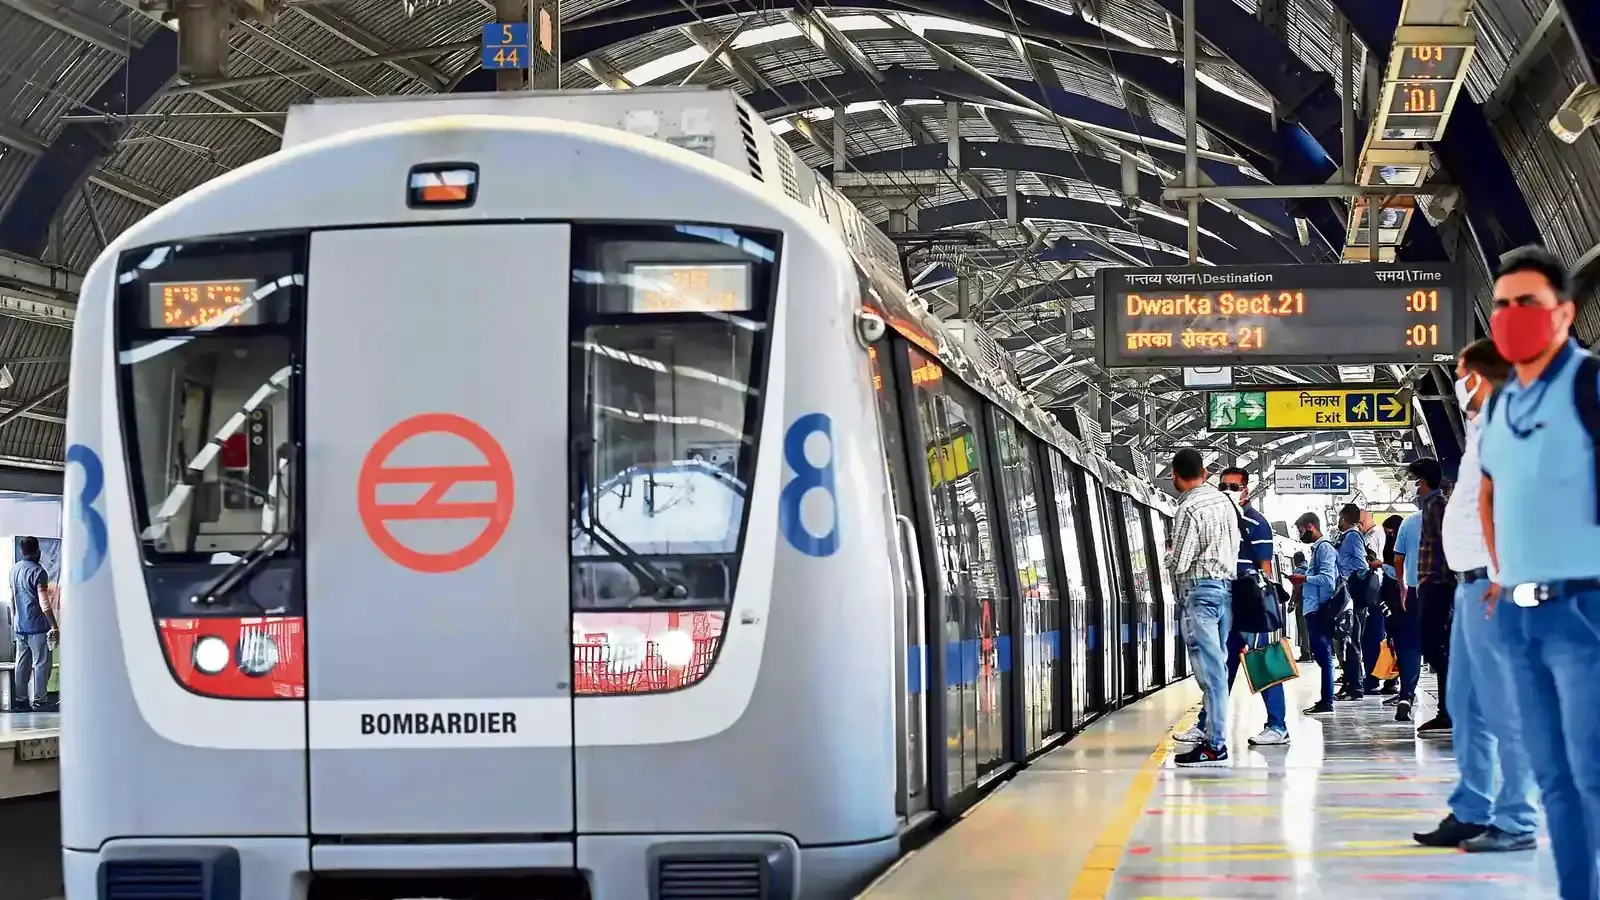 Delhi police apprehends one in connection with pro-Khalistan messages found on metro walls